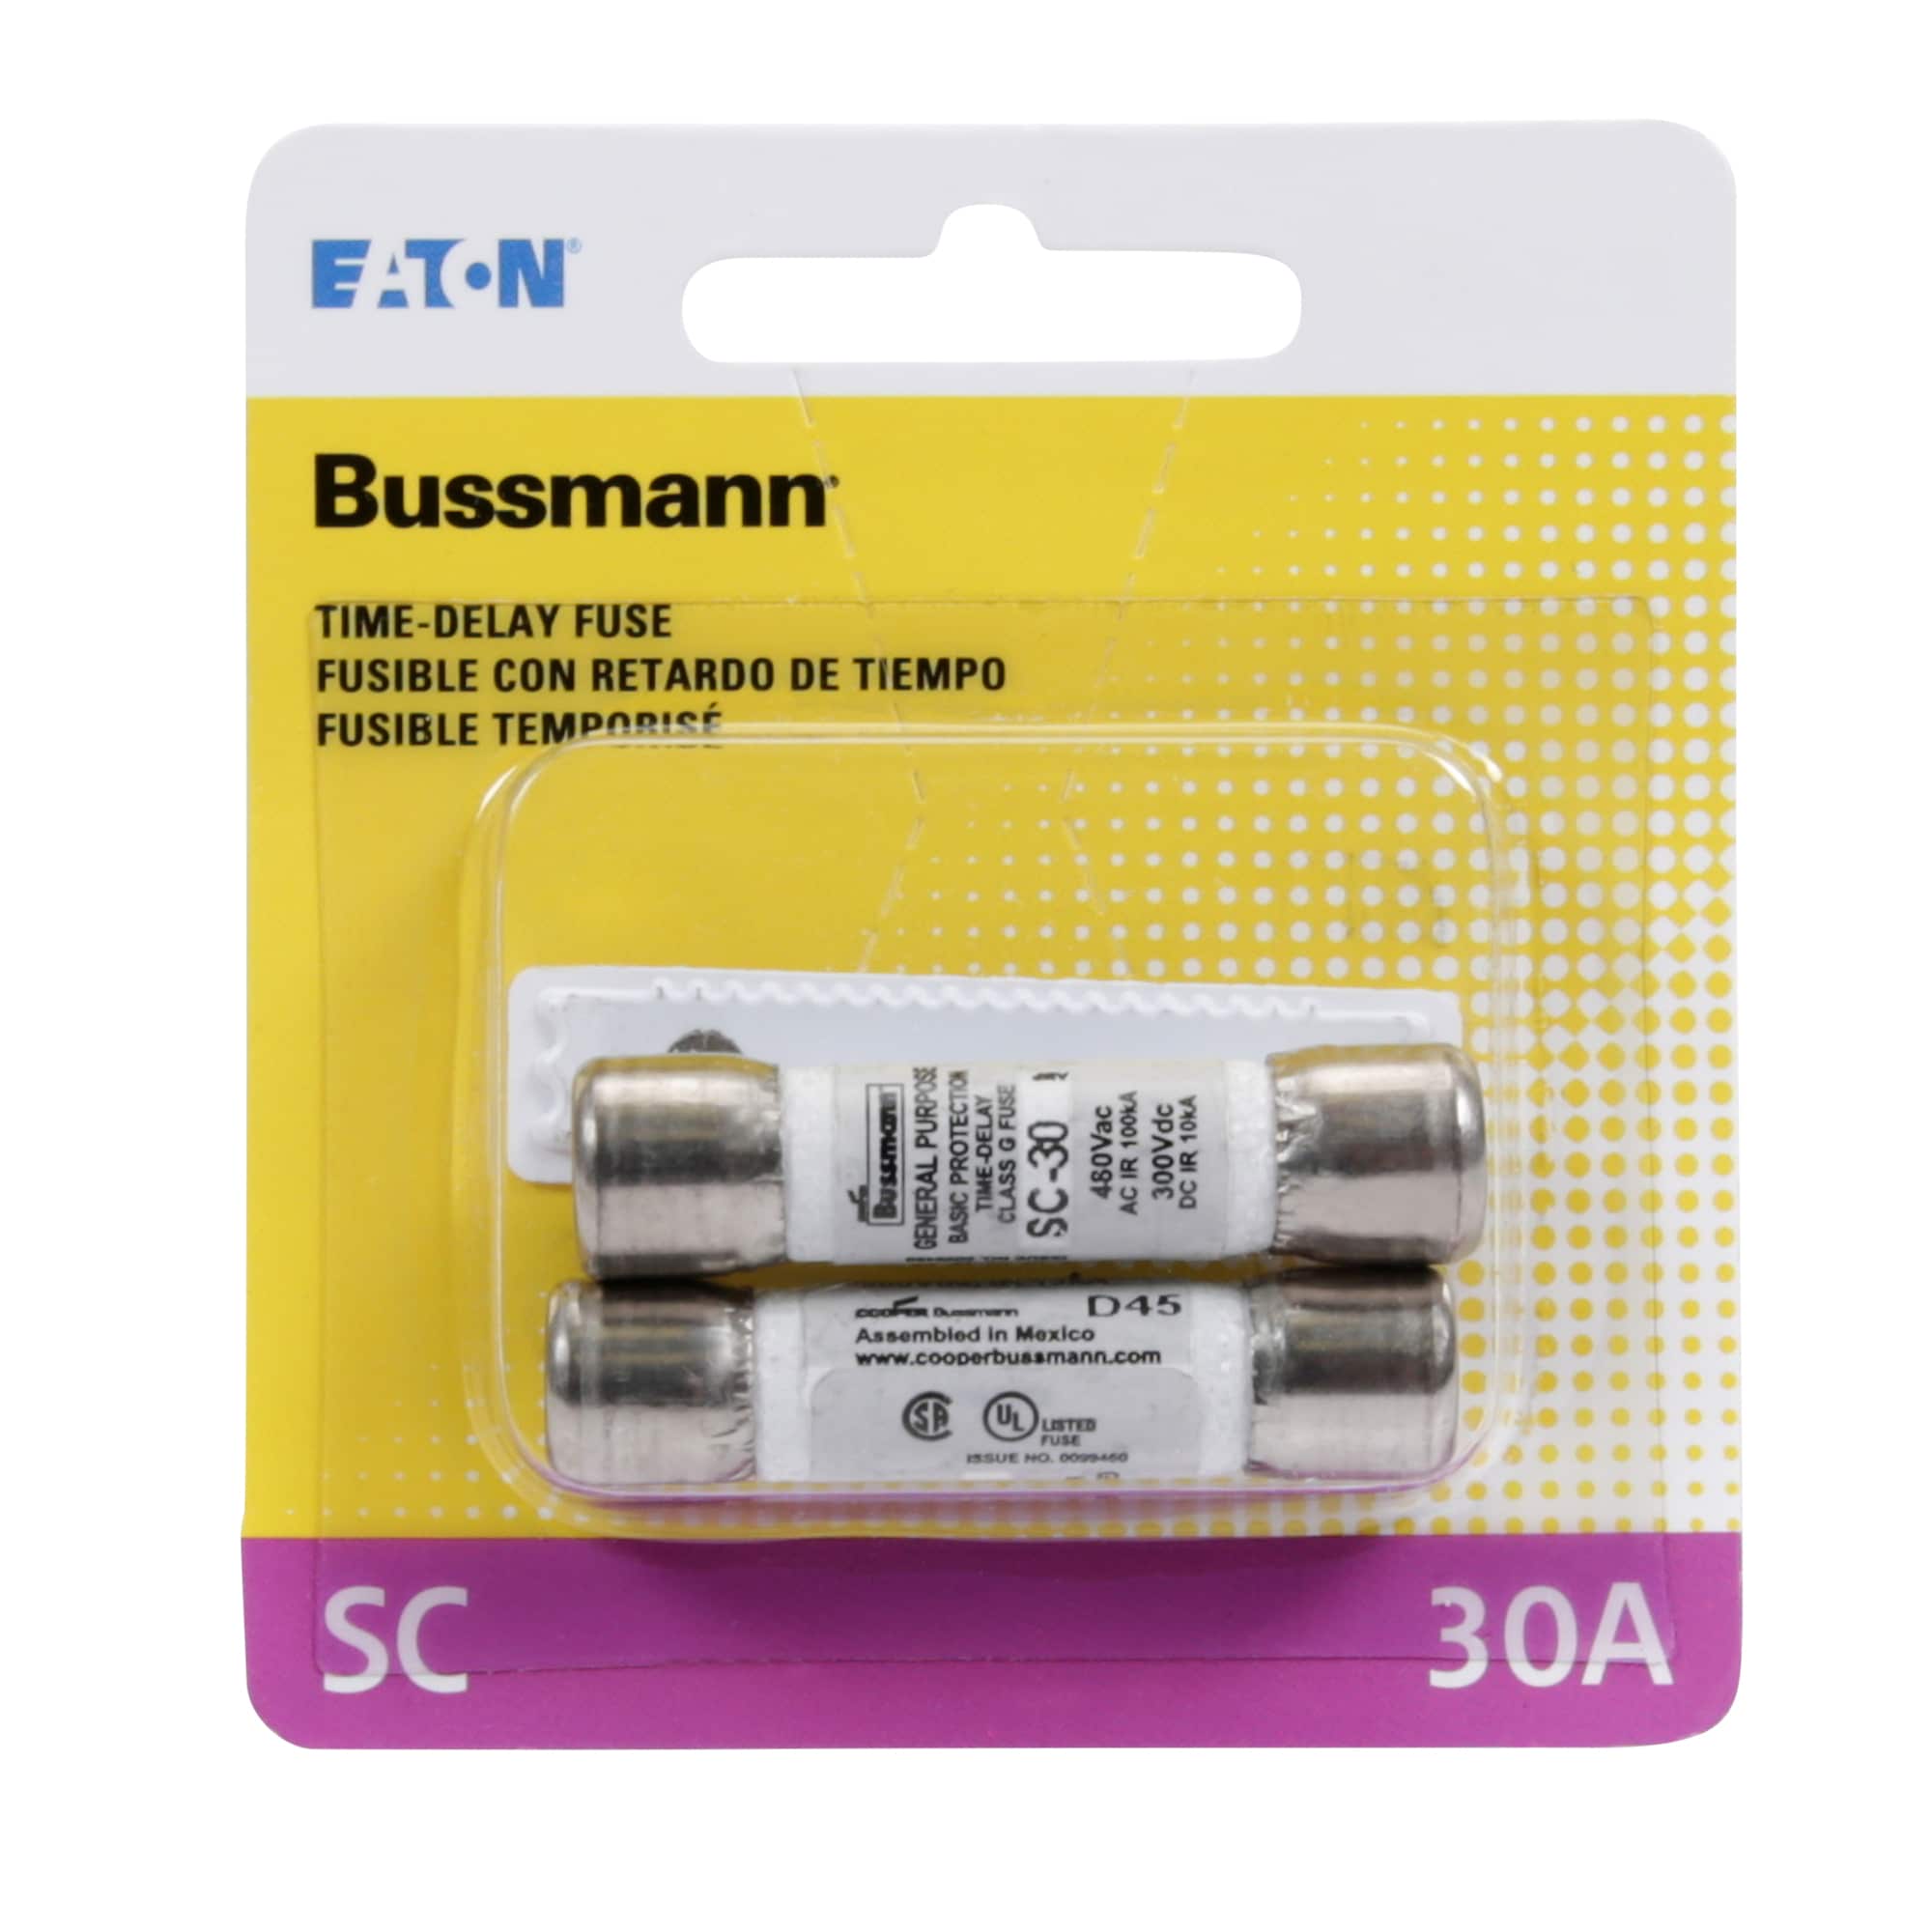 Cooper Bussmann 30a Indicating Fuse W// Fusetron Dual Element and Time Delay 2pk for sale online